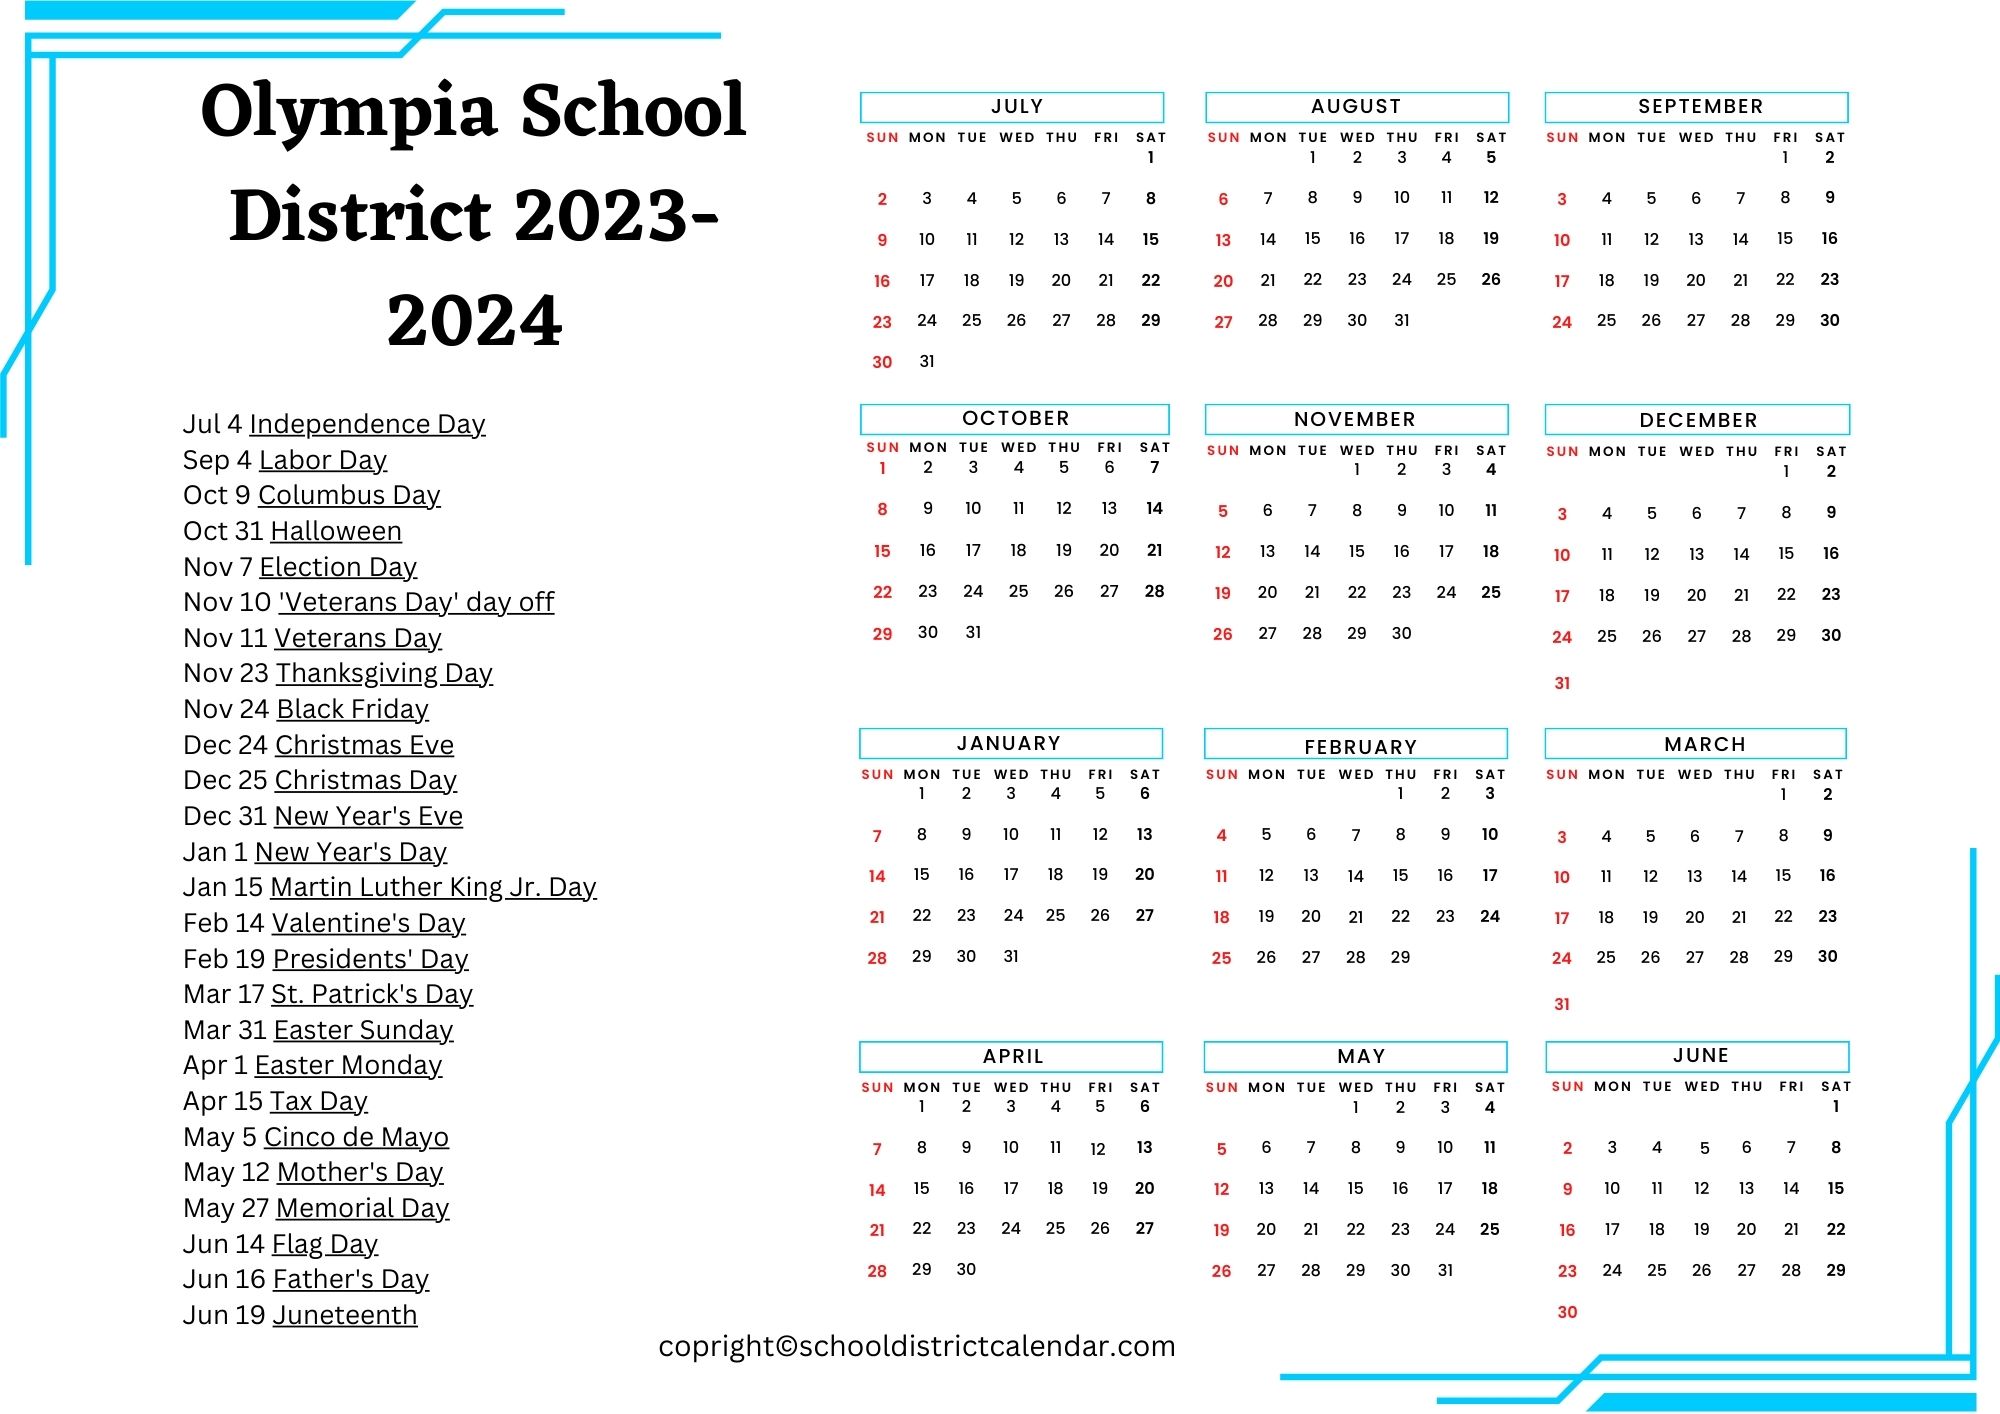 olympia-schools-wants-to-offer-the-public-another-look-at-the-balance-calendar-concept-the